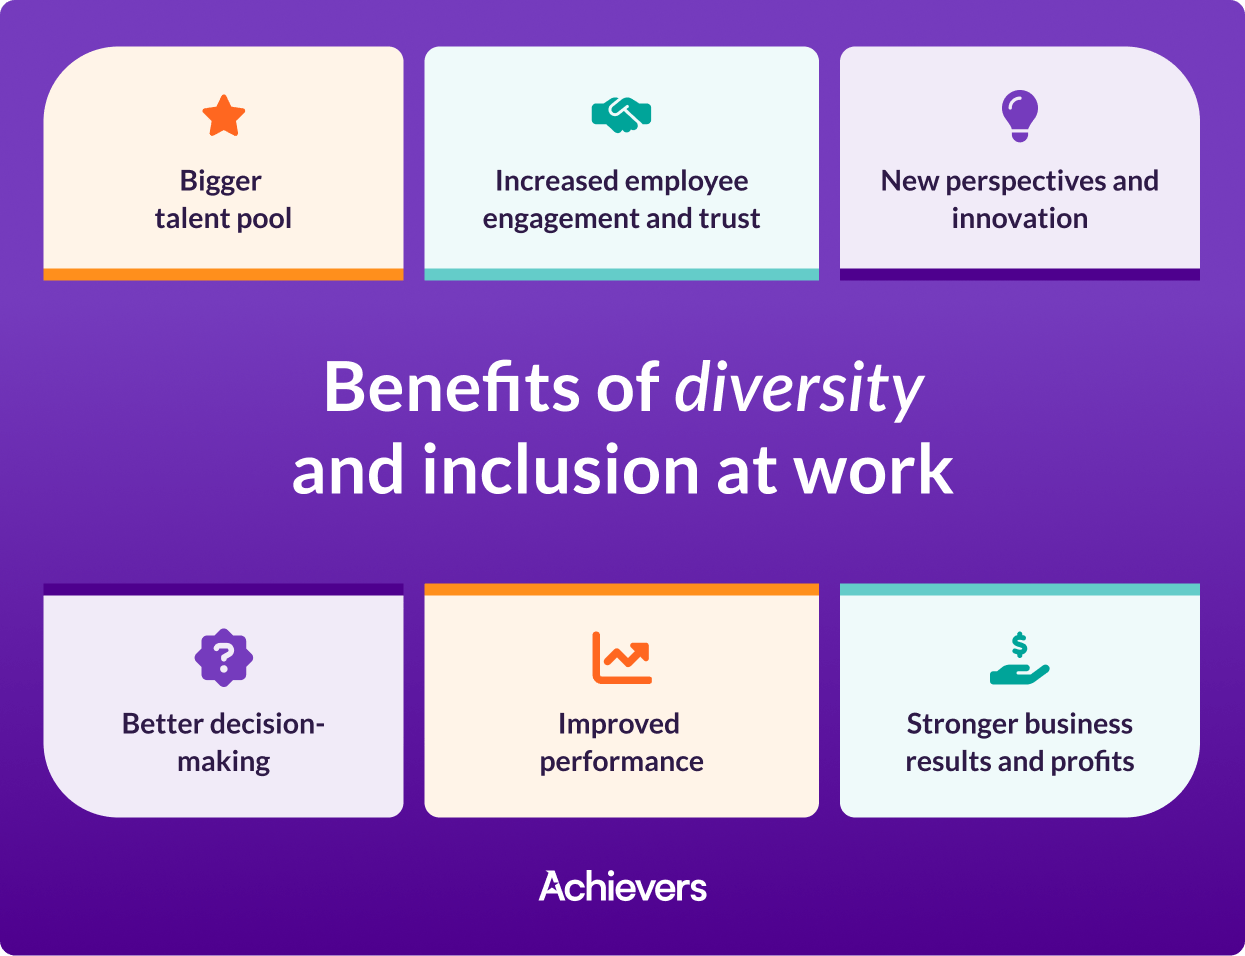 Diversity and inclusion in the workplace: Benefits and challenges